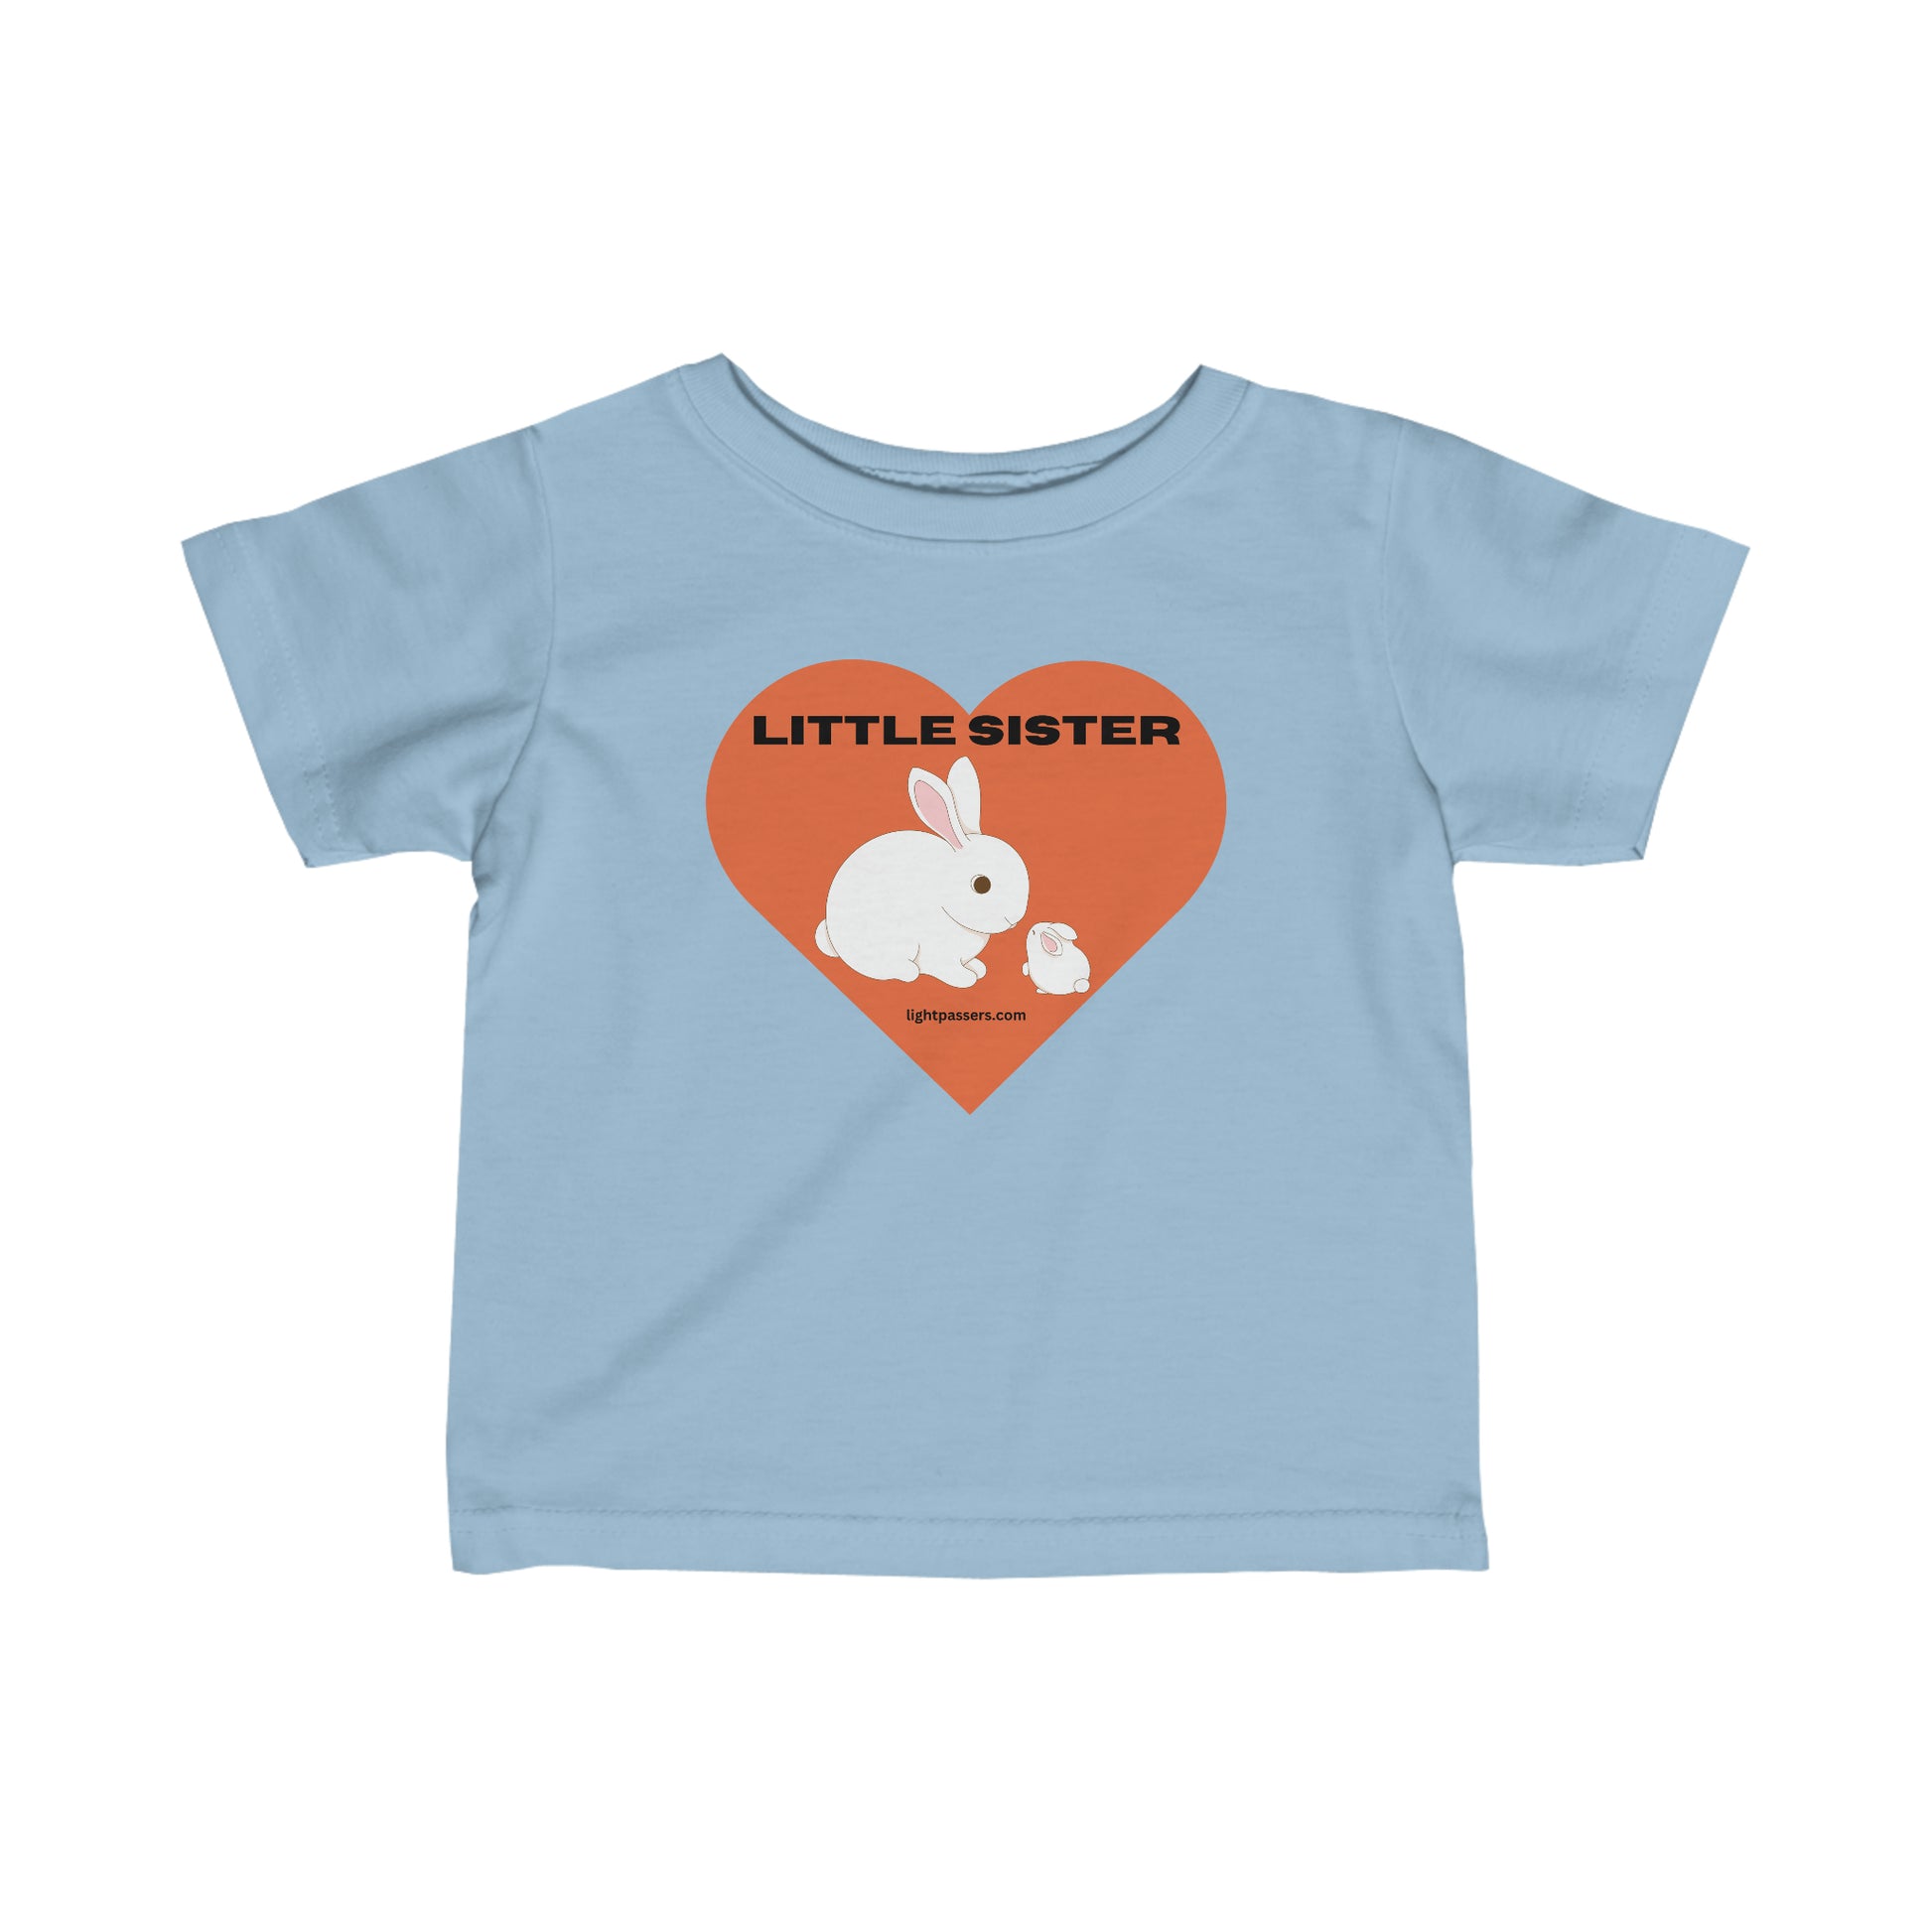 Infant fine jersey tee with a rabbit and heart design, ribbed knitting for durability, taped shoulders for comfort. 100% Combed ringspun cotton, light fabric, classic fit. Little Sister Baby T-shirts.